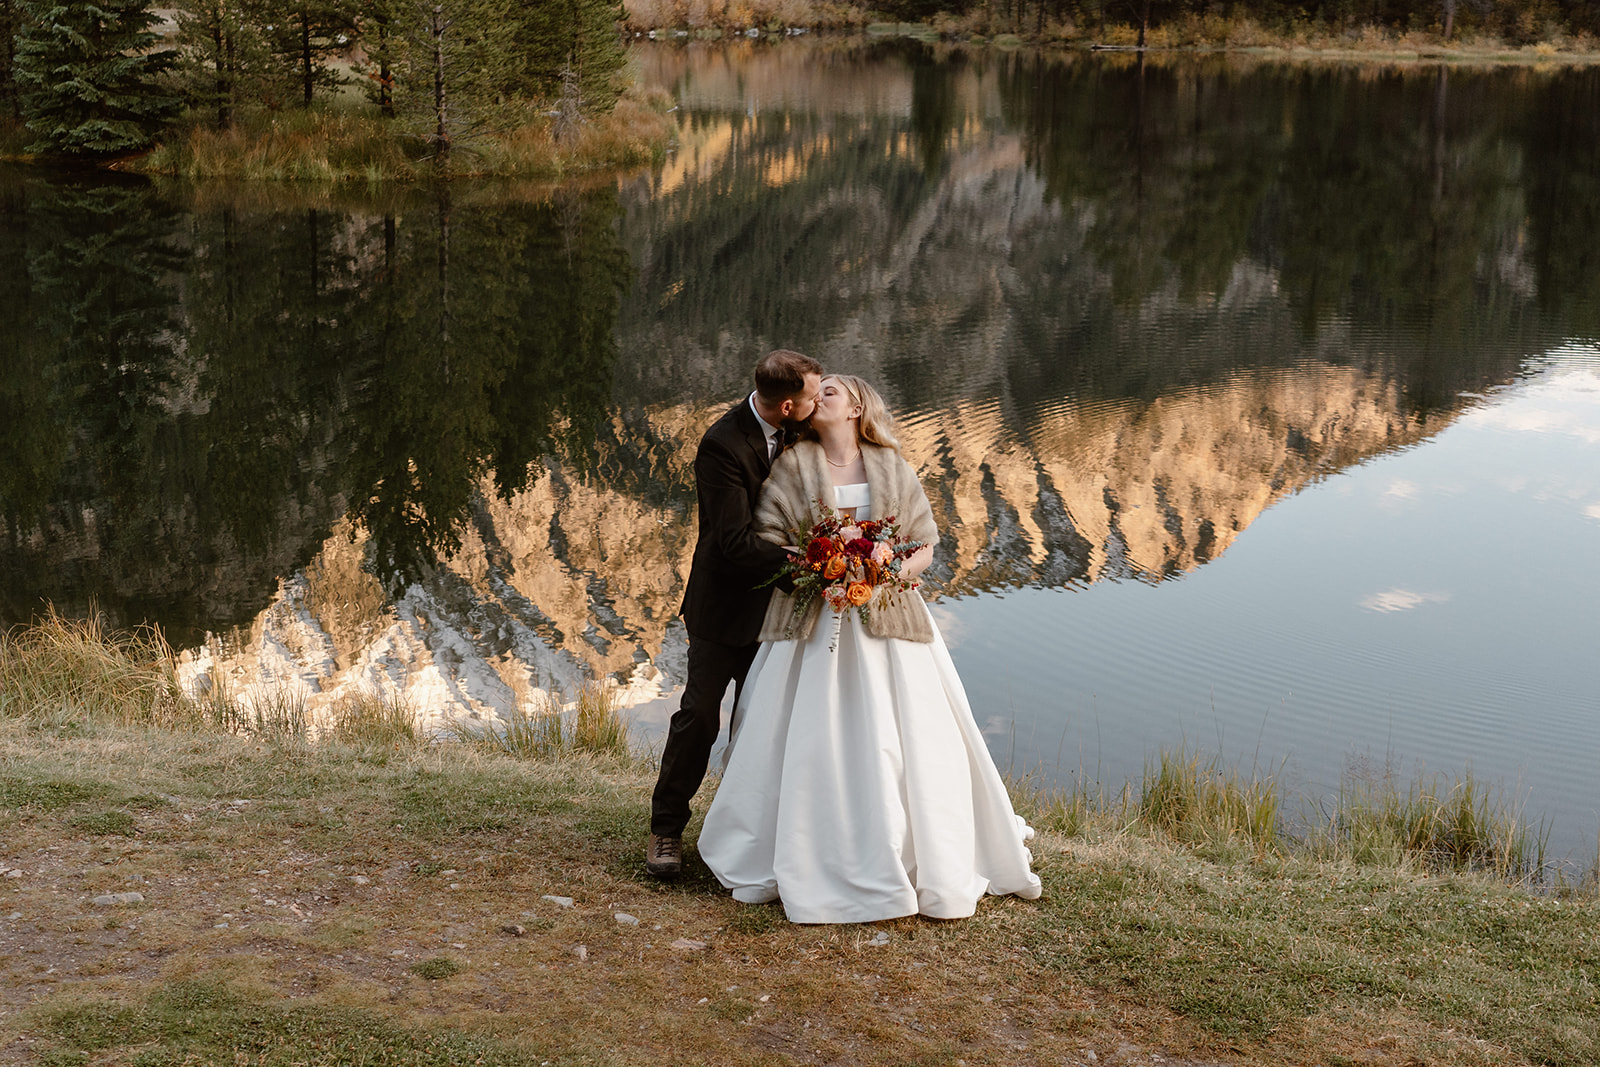 A bride and groom kiss in front of a reflective, Colorado alpine lake during their adventure elopement ceremony.